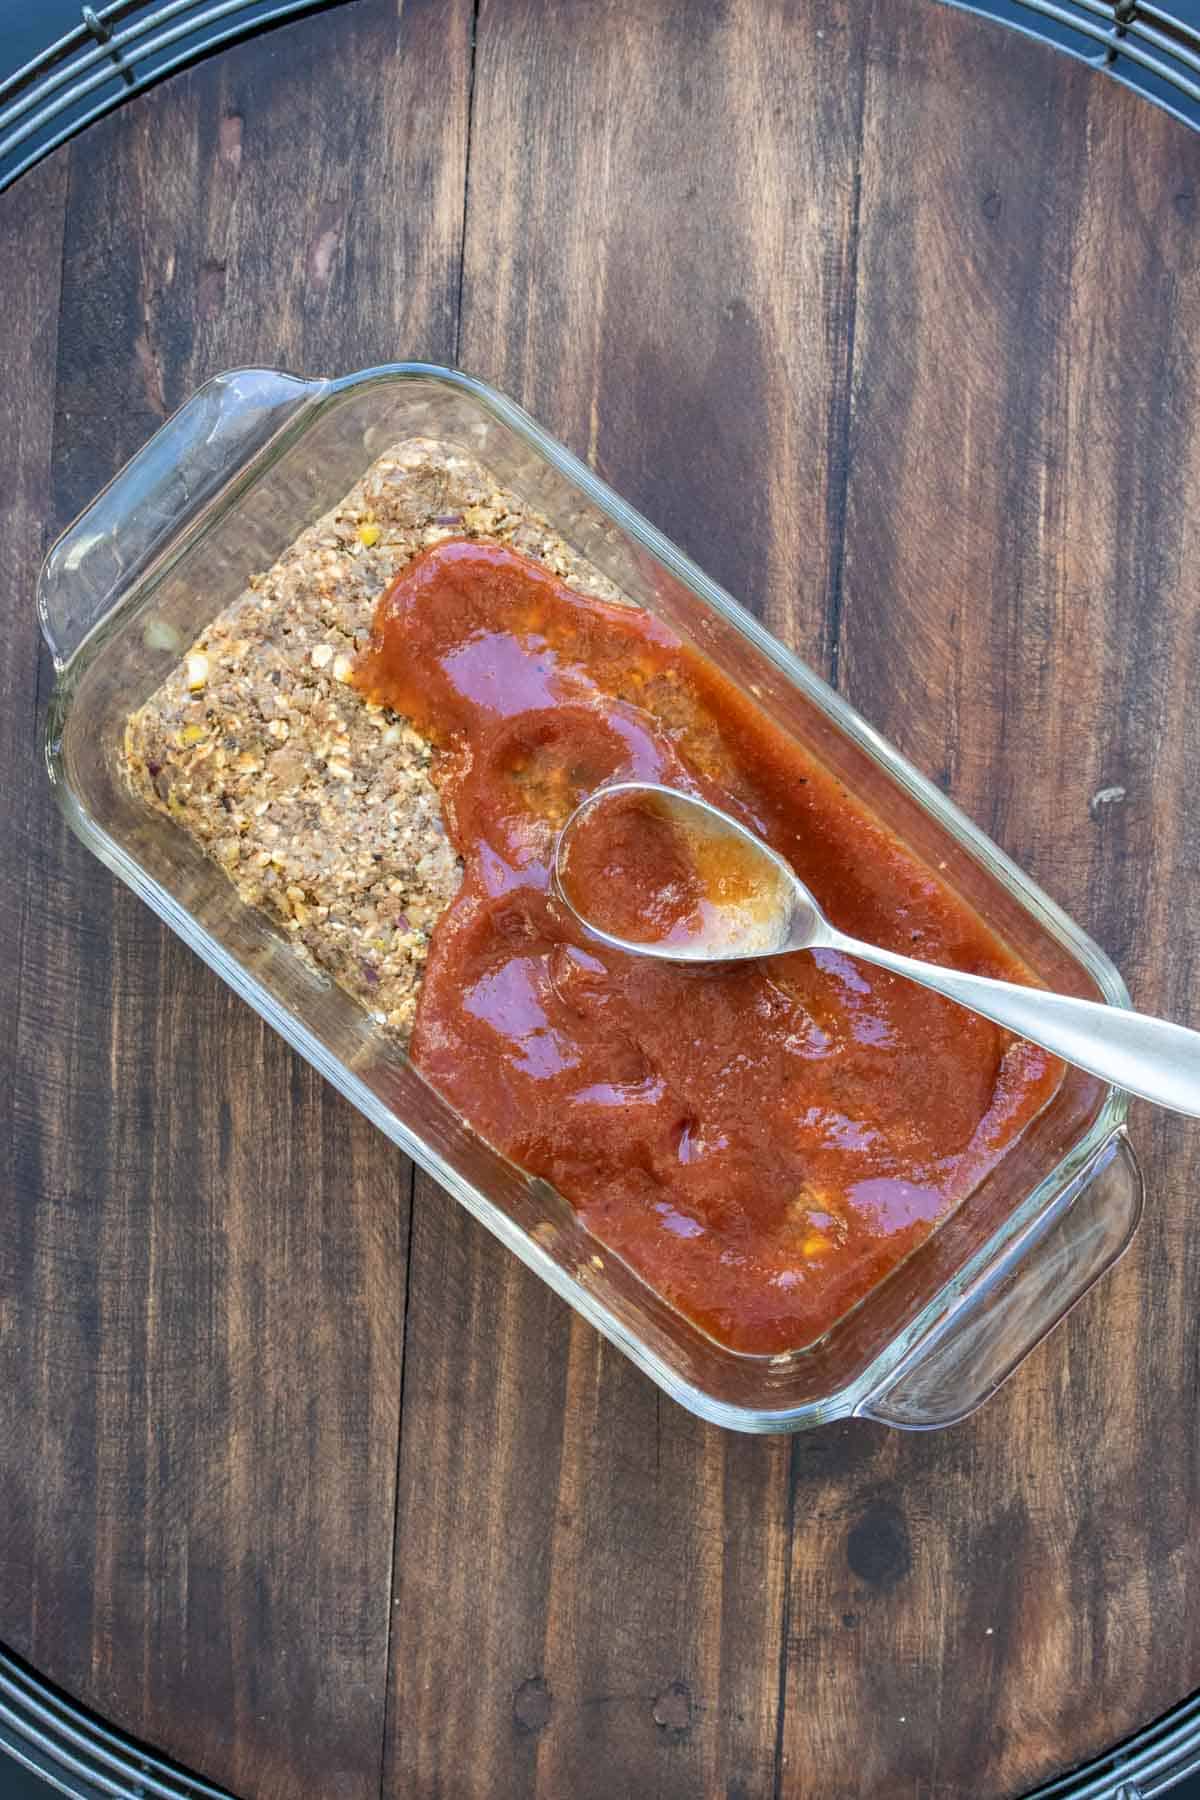 A spoon spreading barbecue sauce on lentil meatloaf mix in a glass pan